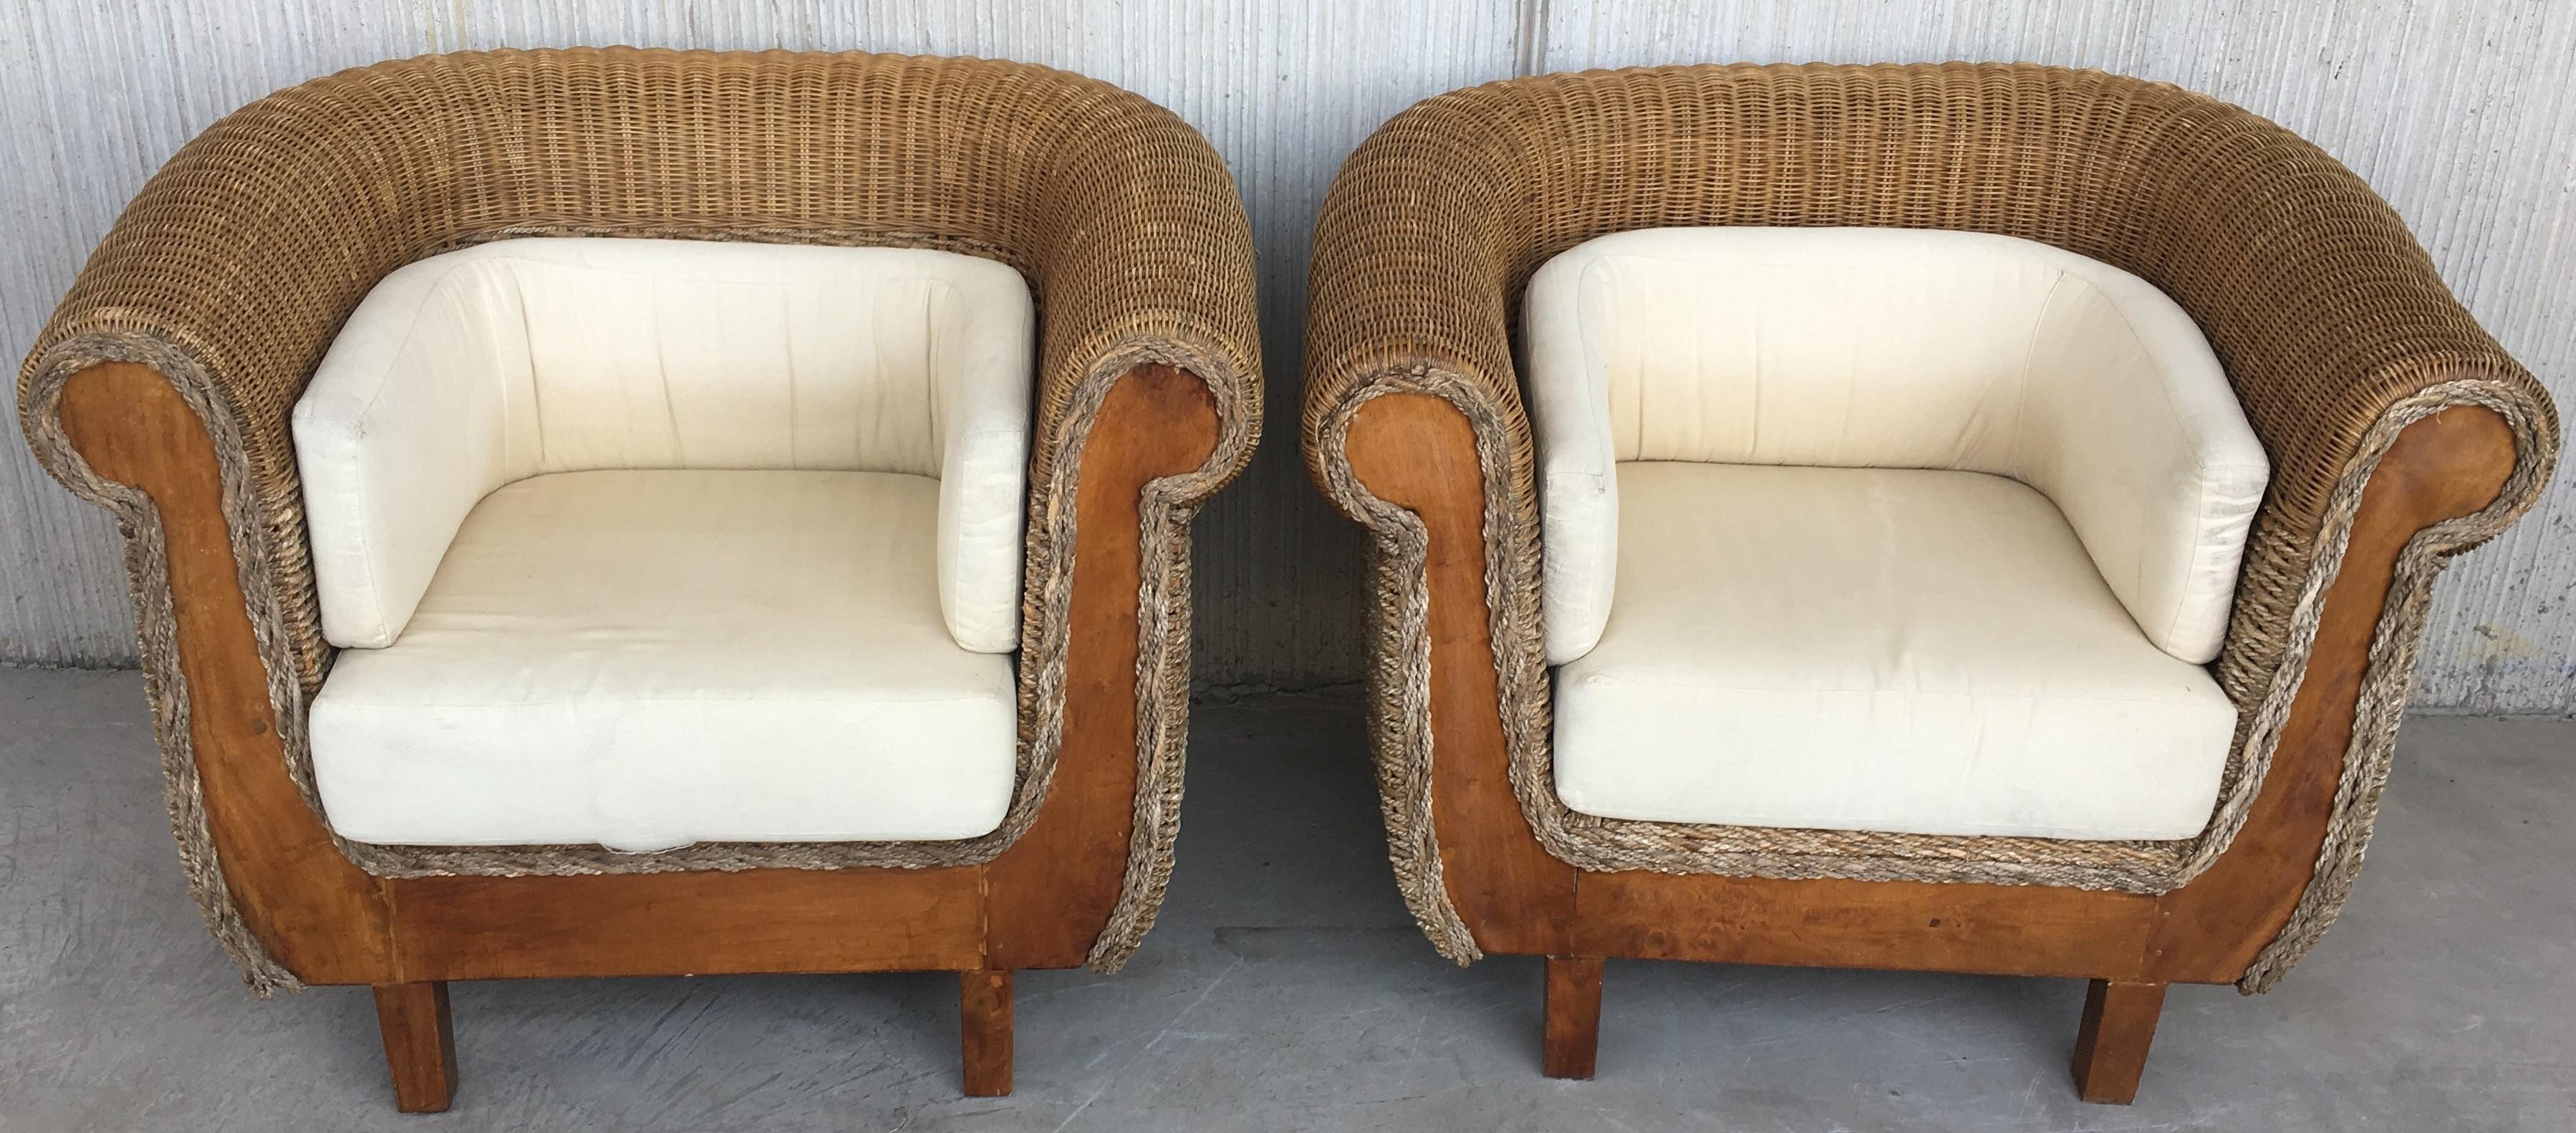 Italian Midcentury Set of Big Armchairs with Matching Coffee Table, Rattan and Wood For Sale